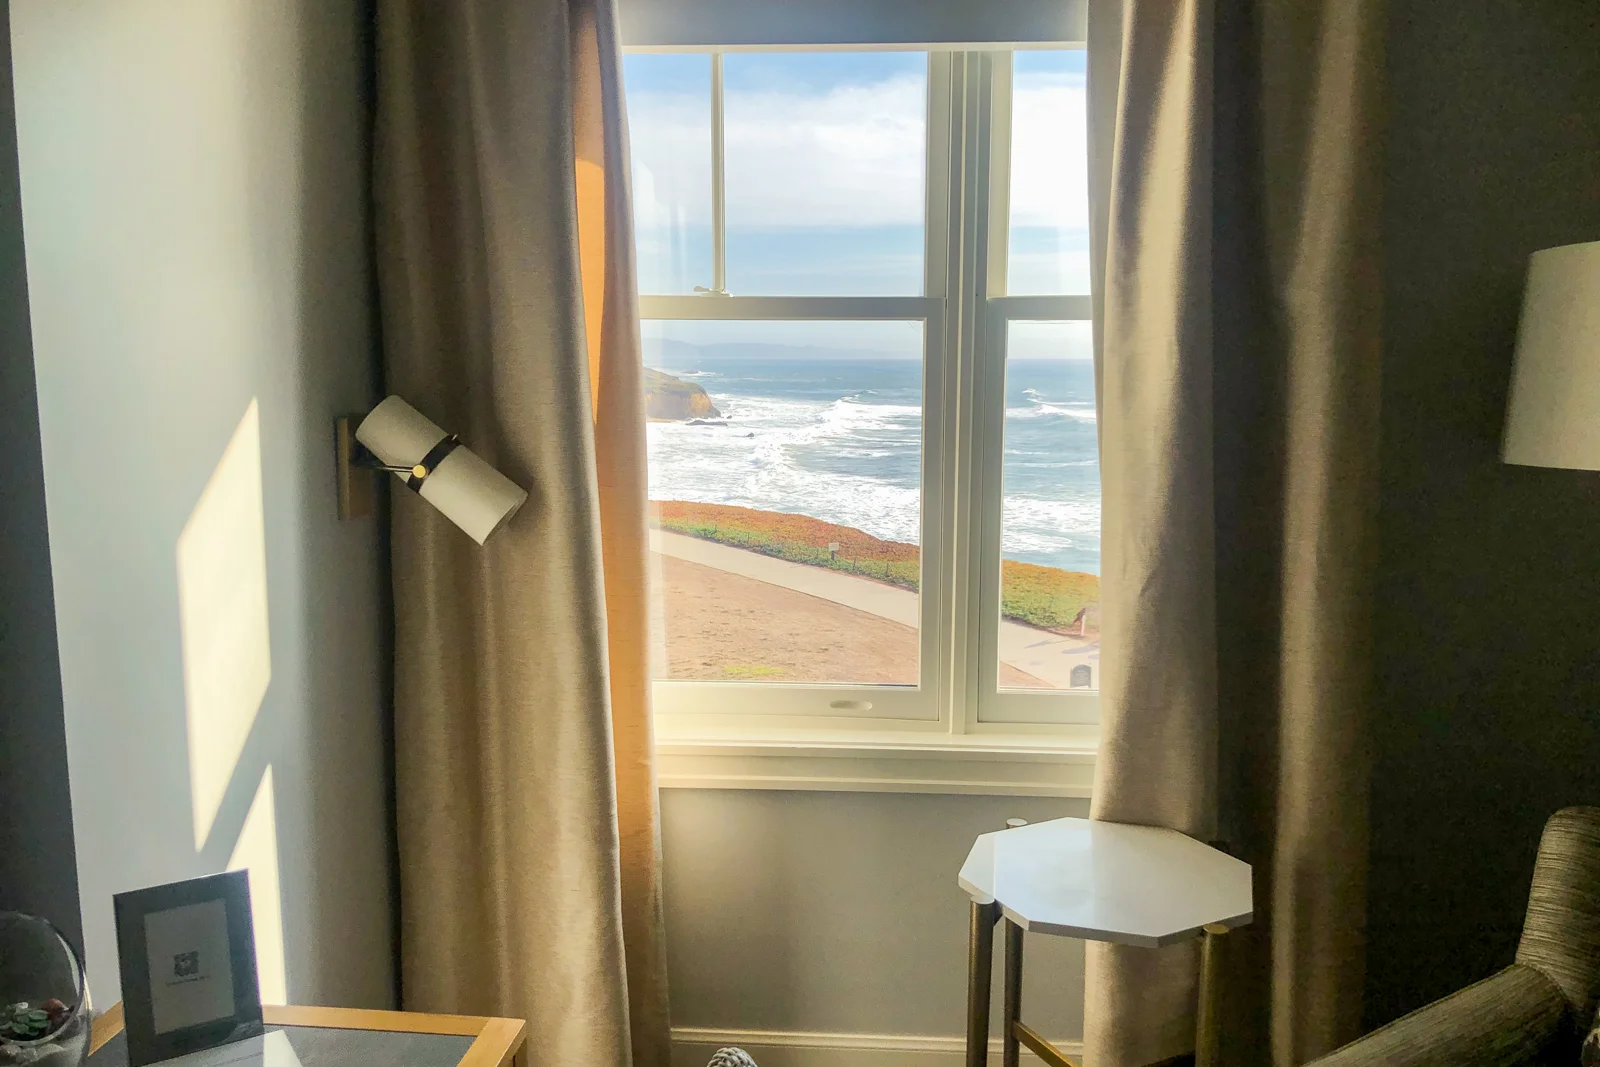 Why The Ritz-Carlton, Half Moon Bay is a worthwhile use of points for one night in a seaside paradise